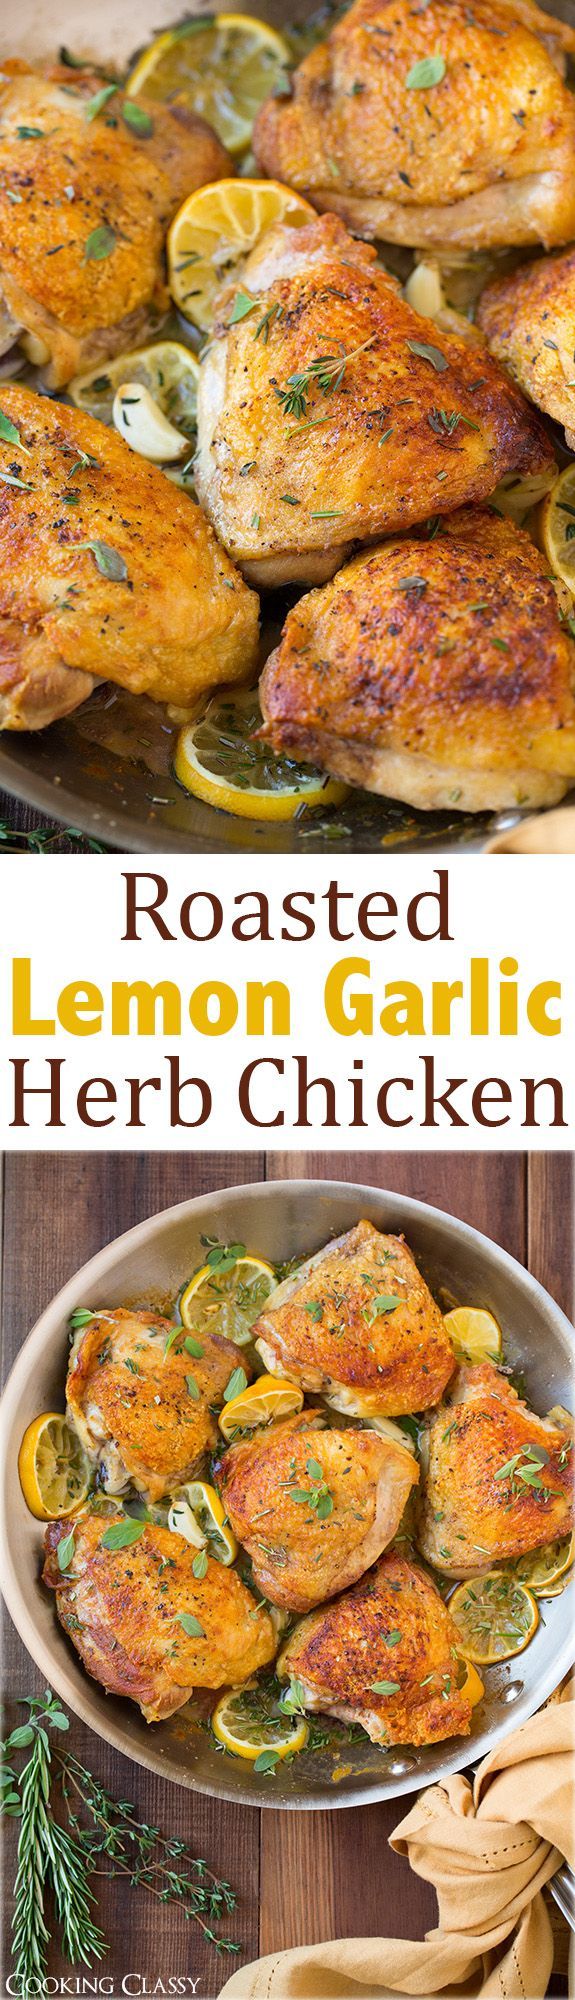 Roasted Lemon Garlic Herb Chicken – this chicken is DELICIOUS! Easy to make and the whole family loved it!